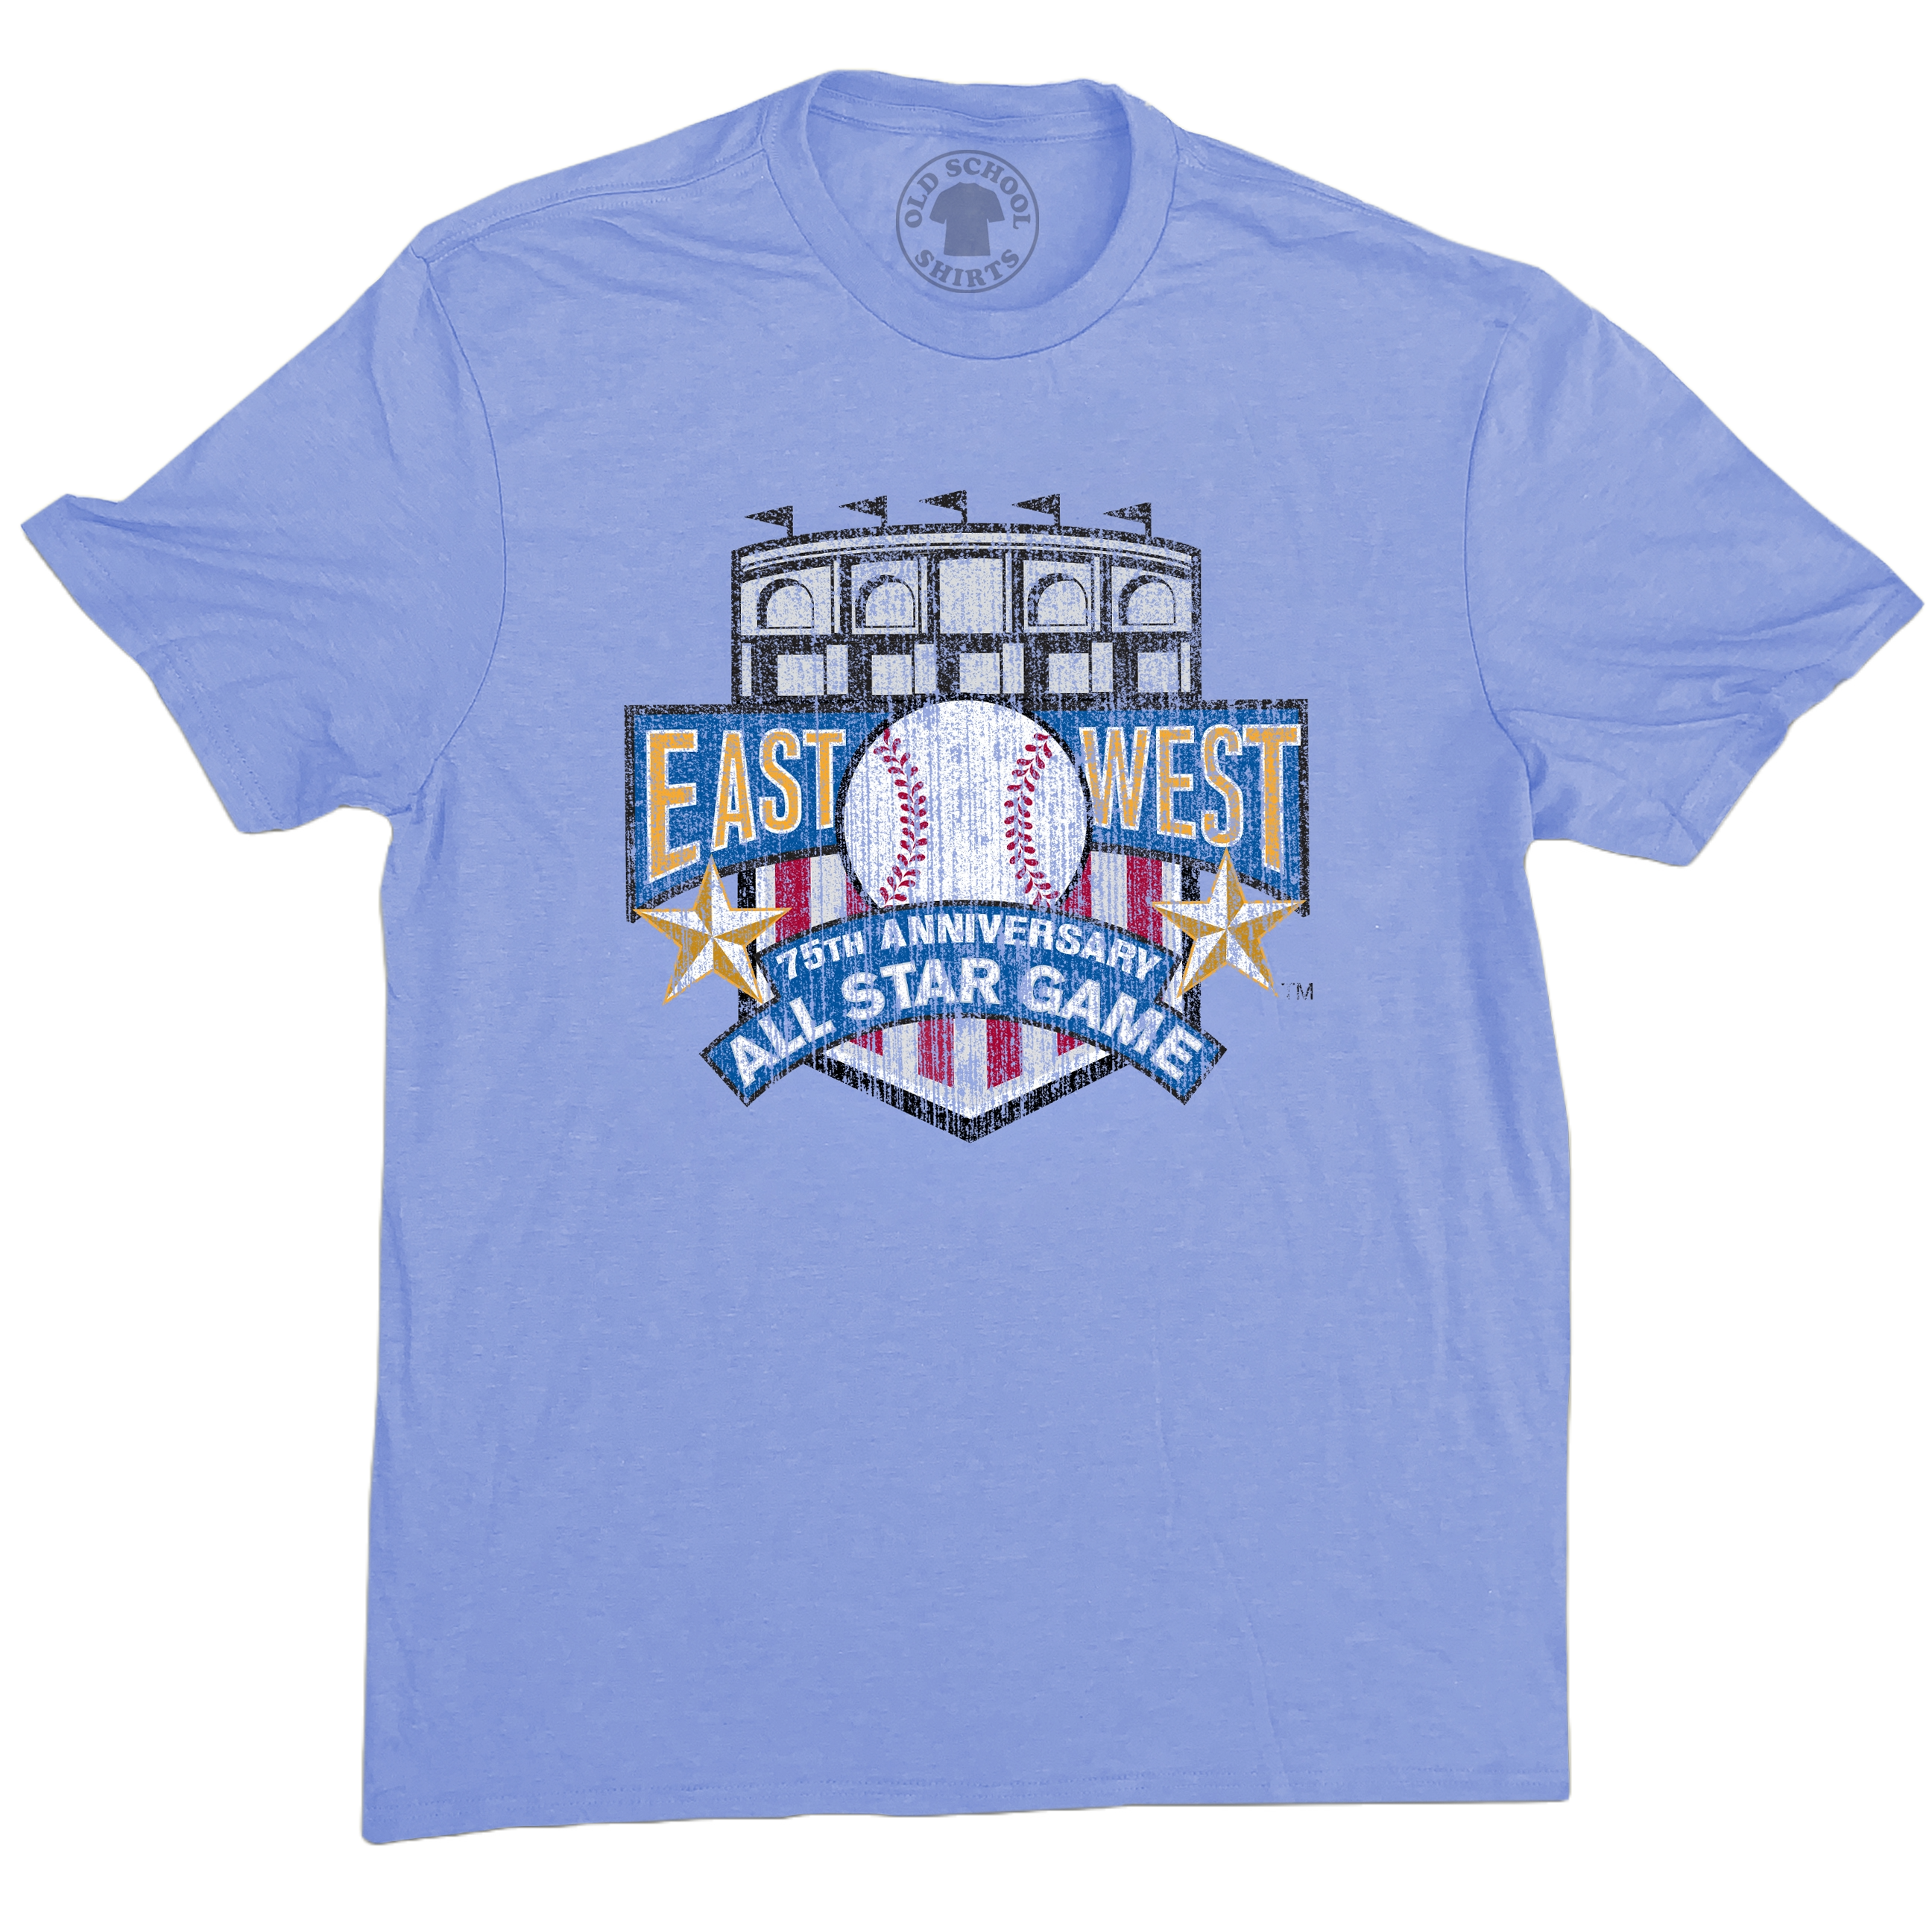 East-West 75th Anniversary All-Star Game Unisex Tee